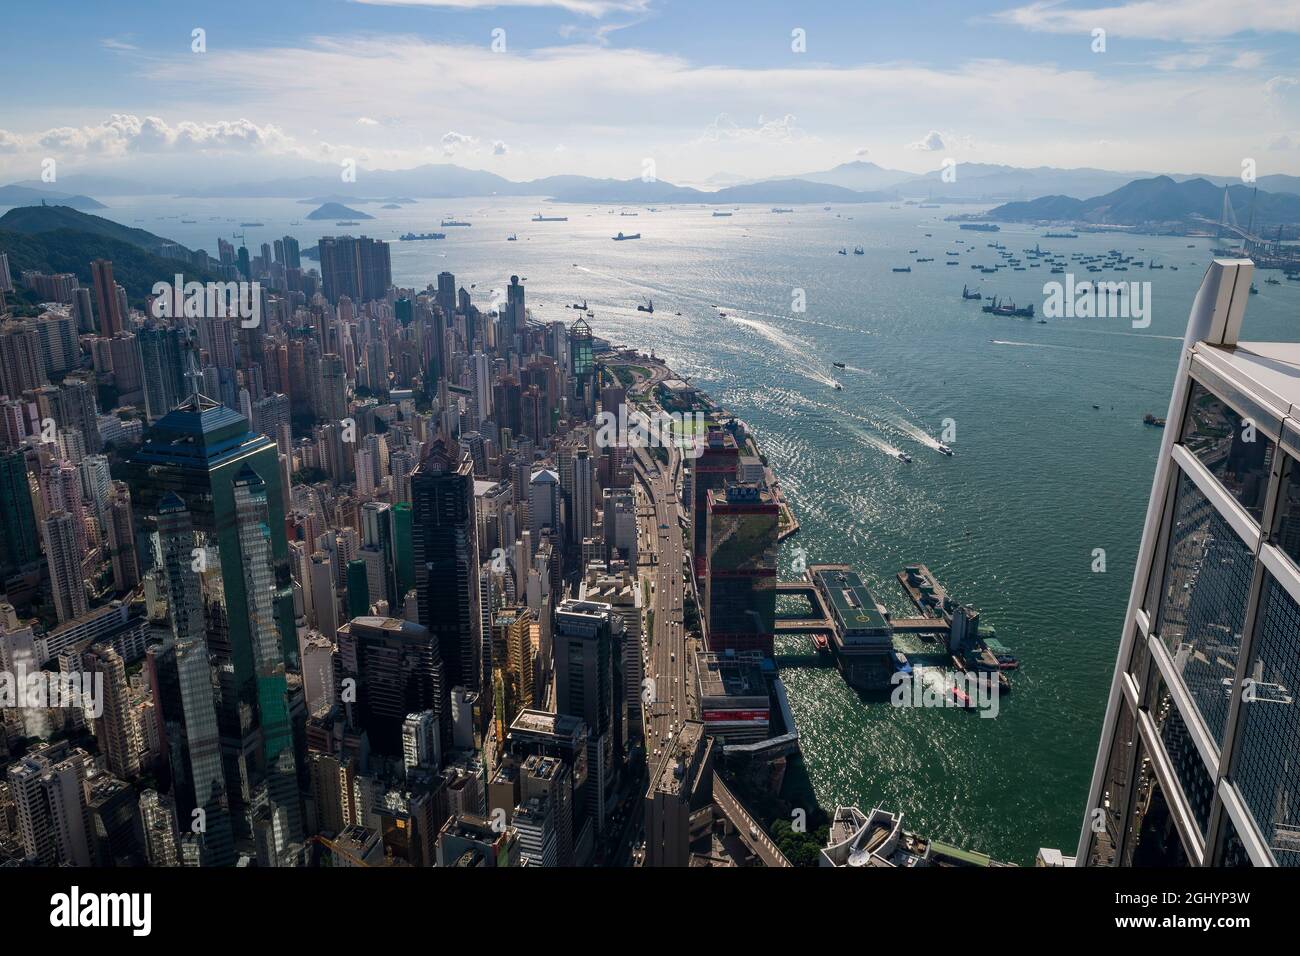 Sheung Wan, Sai Ying Pun and Kennedy Town, looking east to Lantau Island, from the roof of 2ifc, Hong Kong Island's tallest building Stock Photo